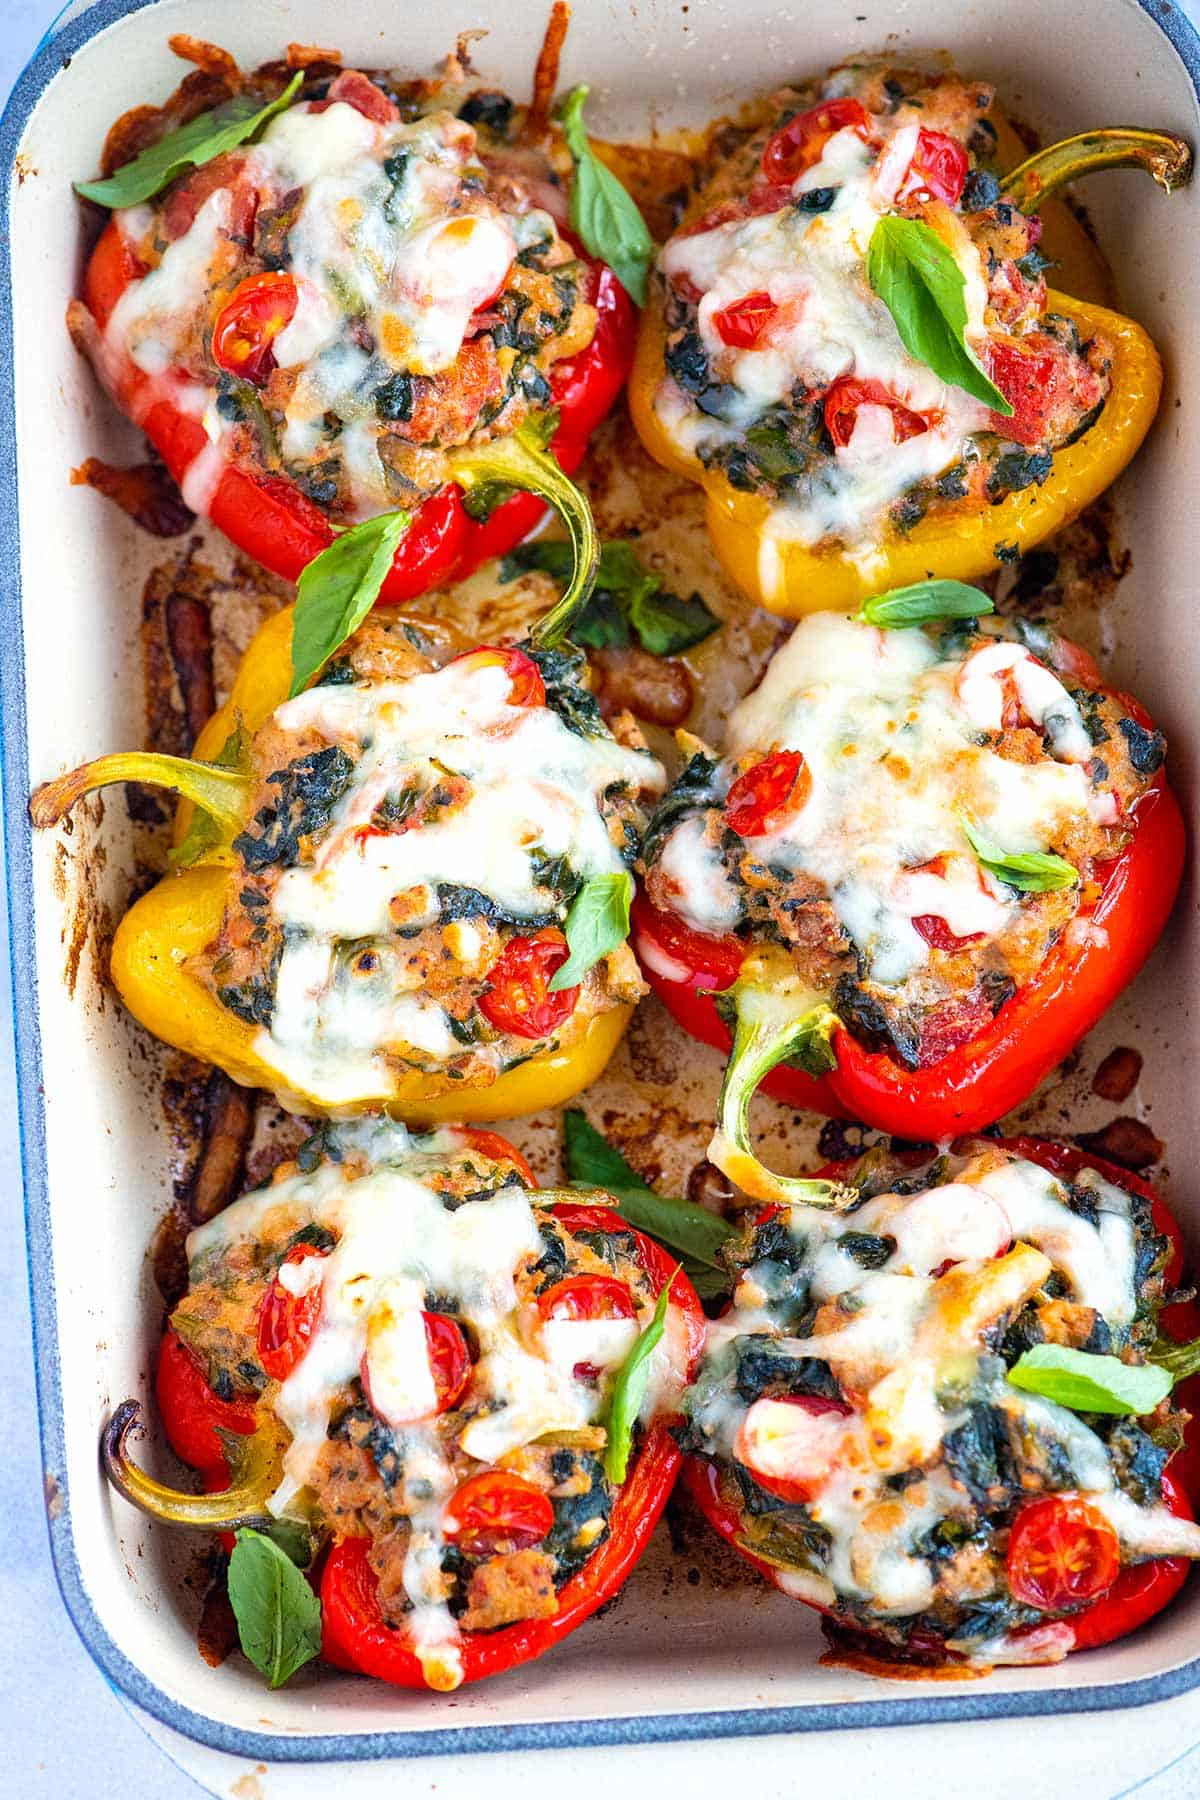 Stuffed Peppers filled with sausage, spinach and cheese